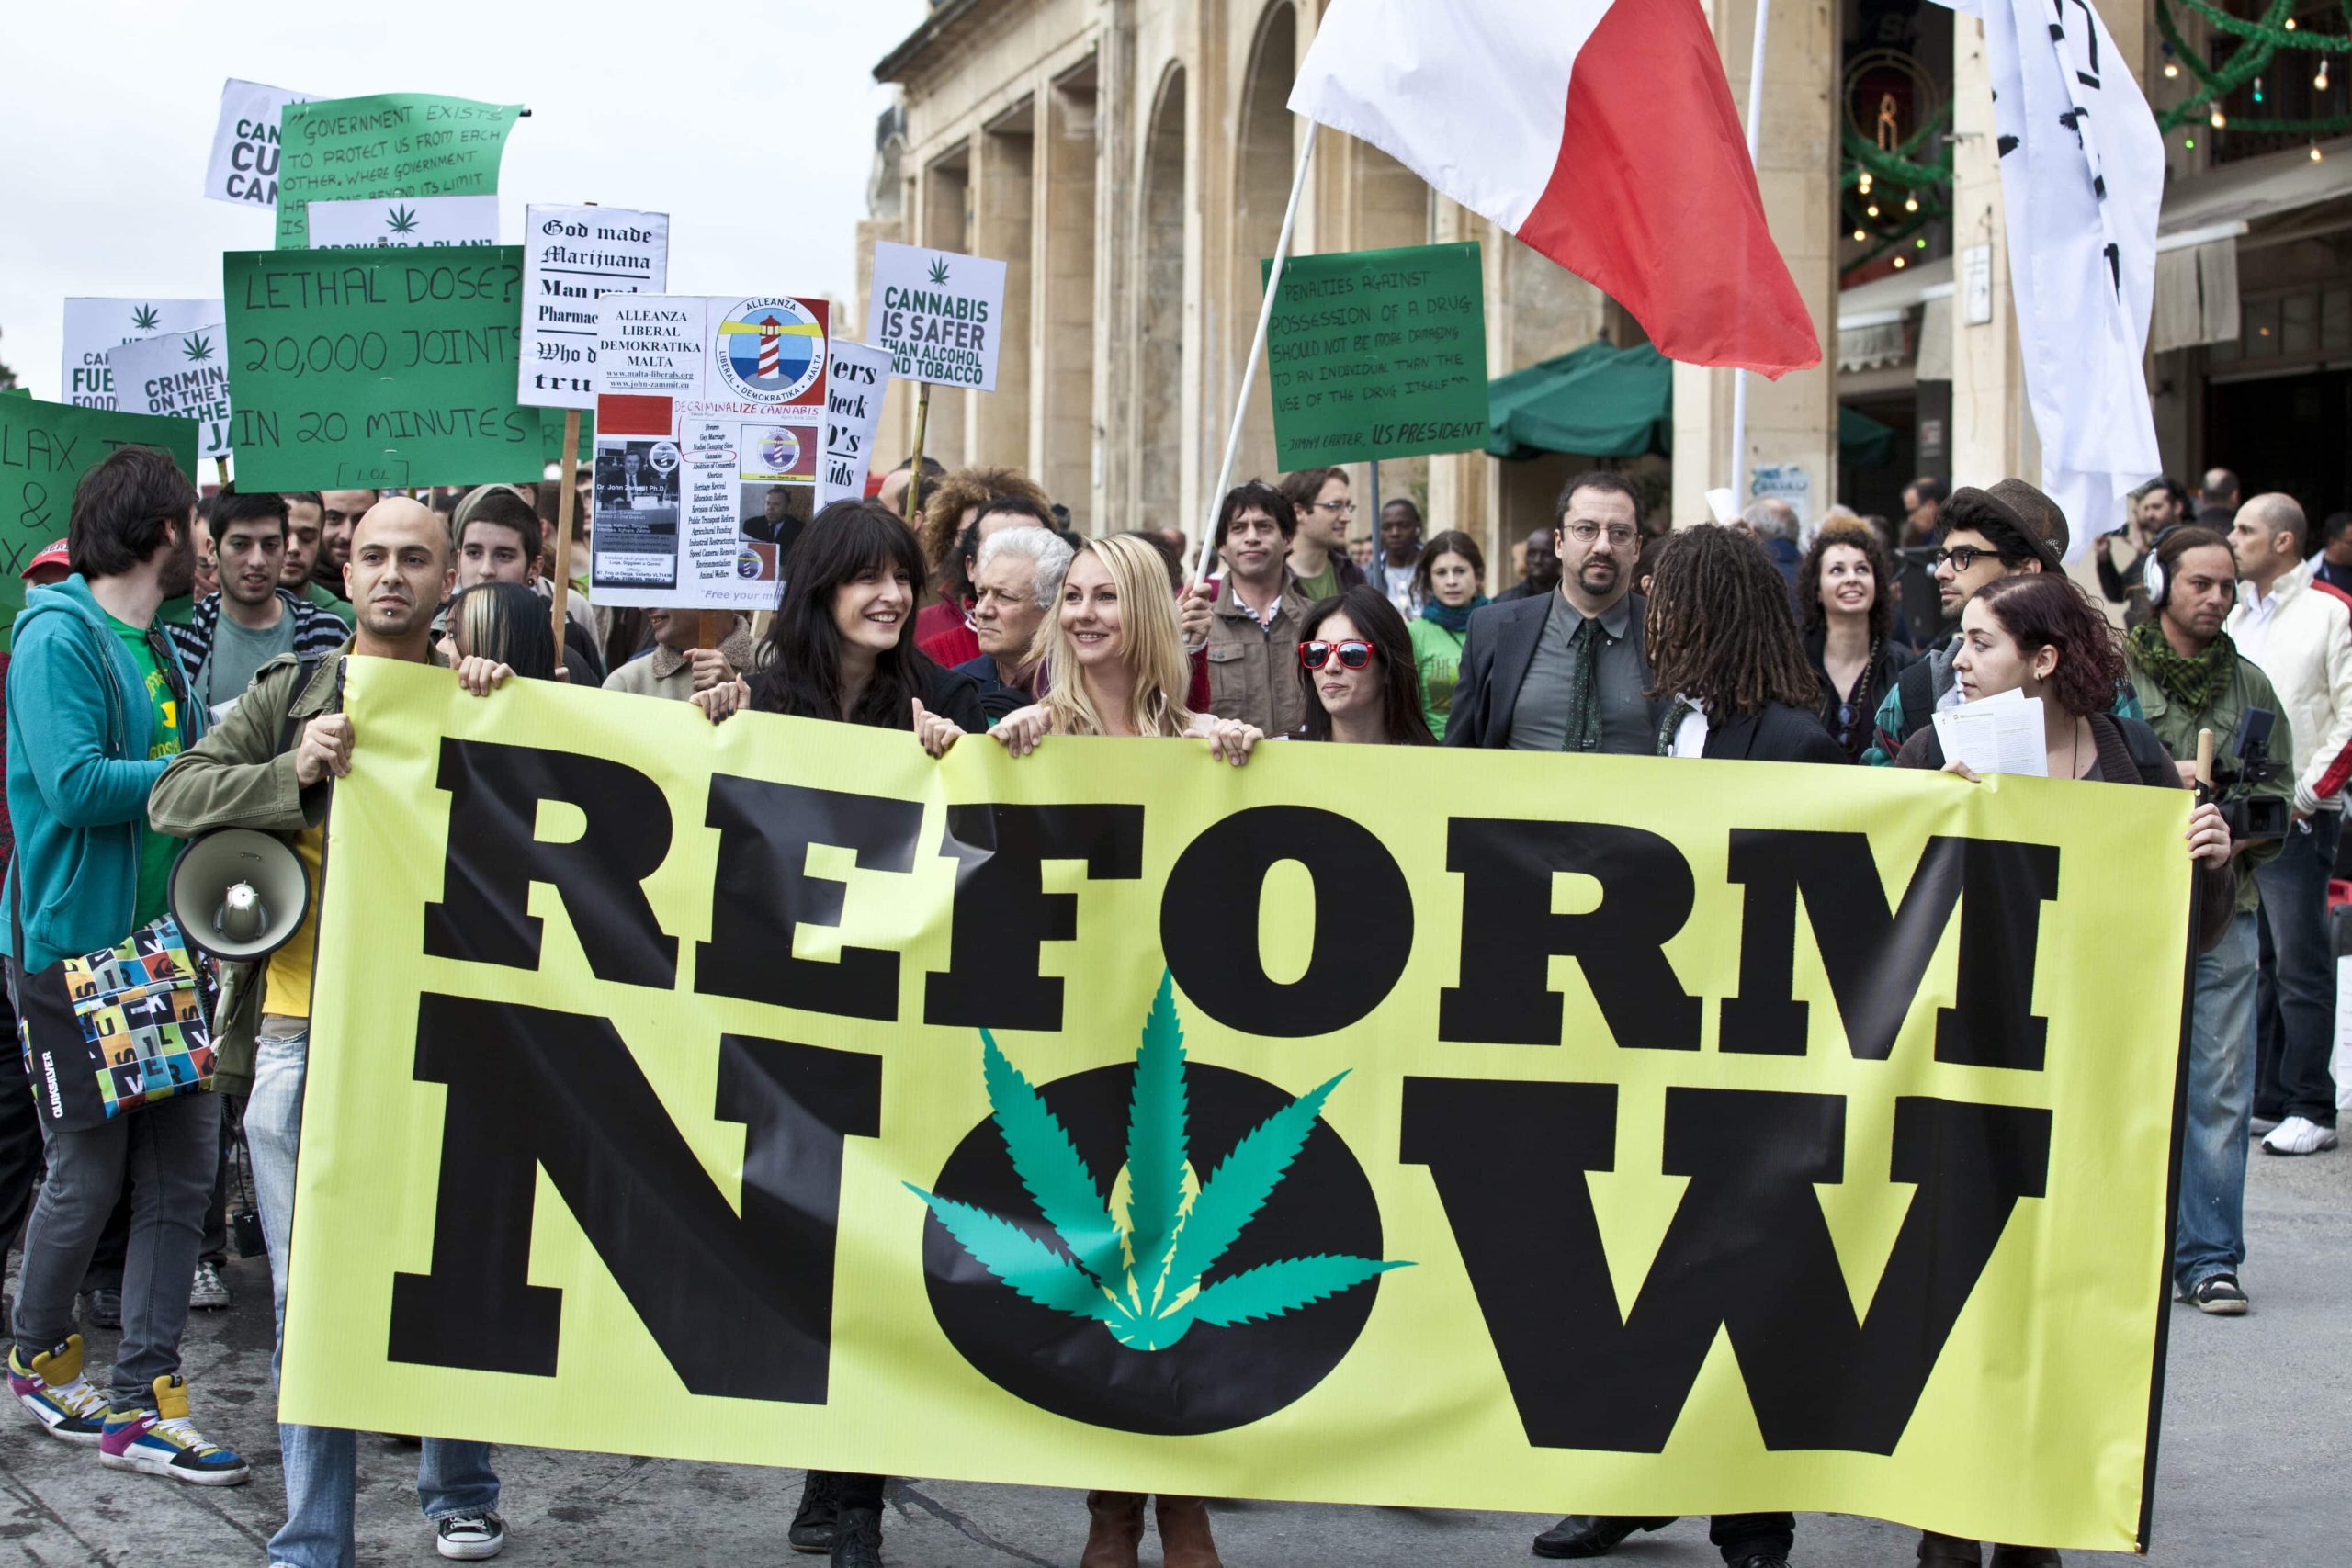 A 15-Year Court Case Recently Came to an End for Maltese Cannabis Consumer